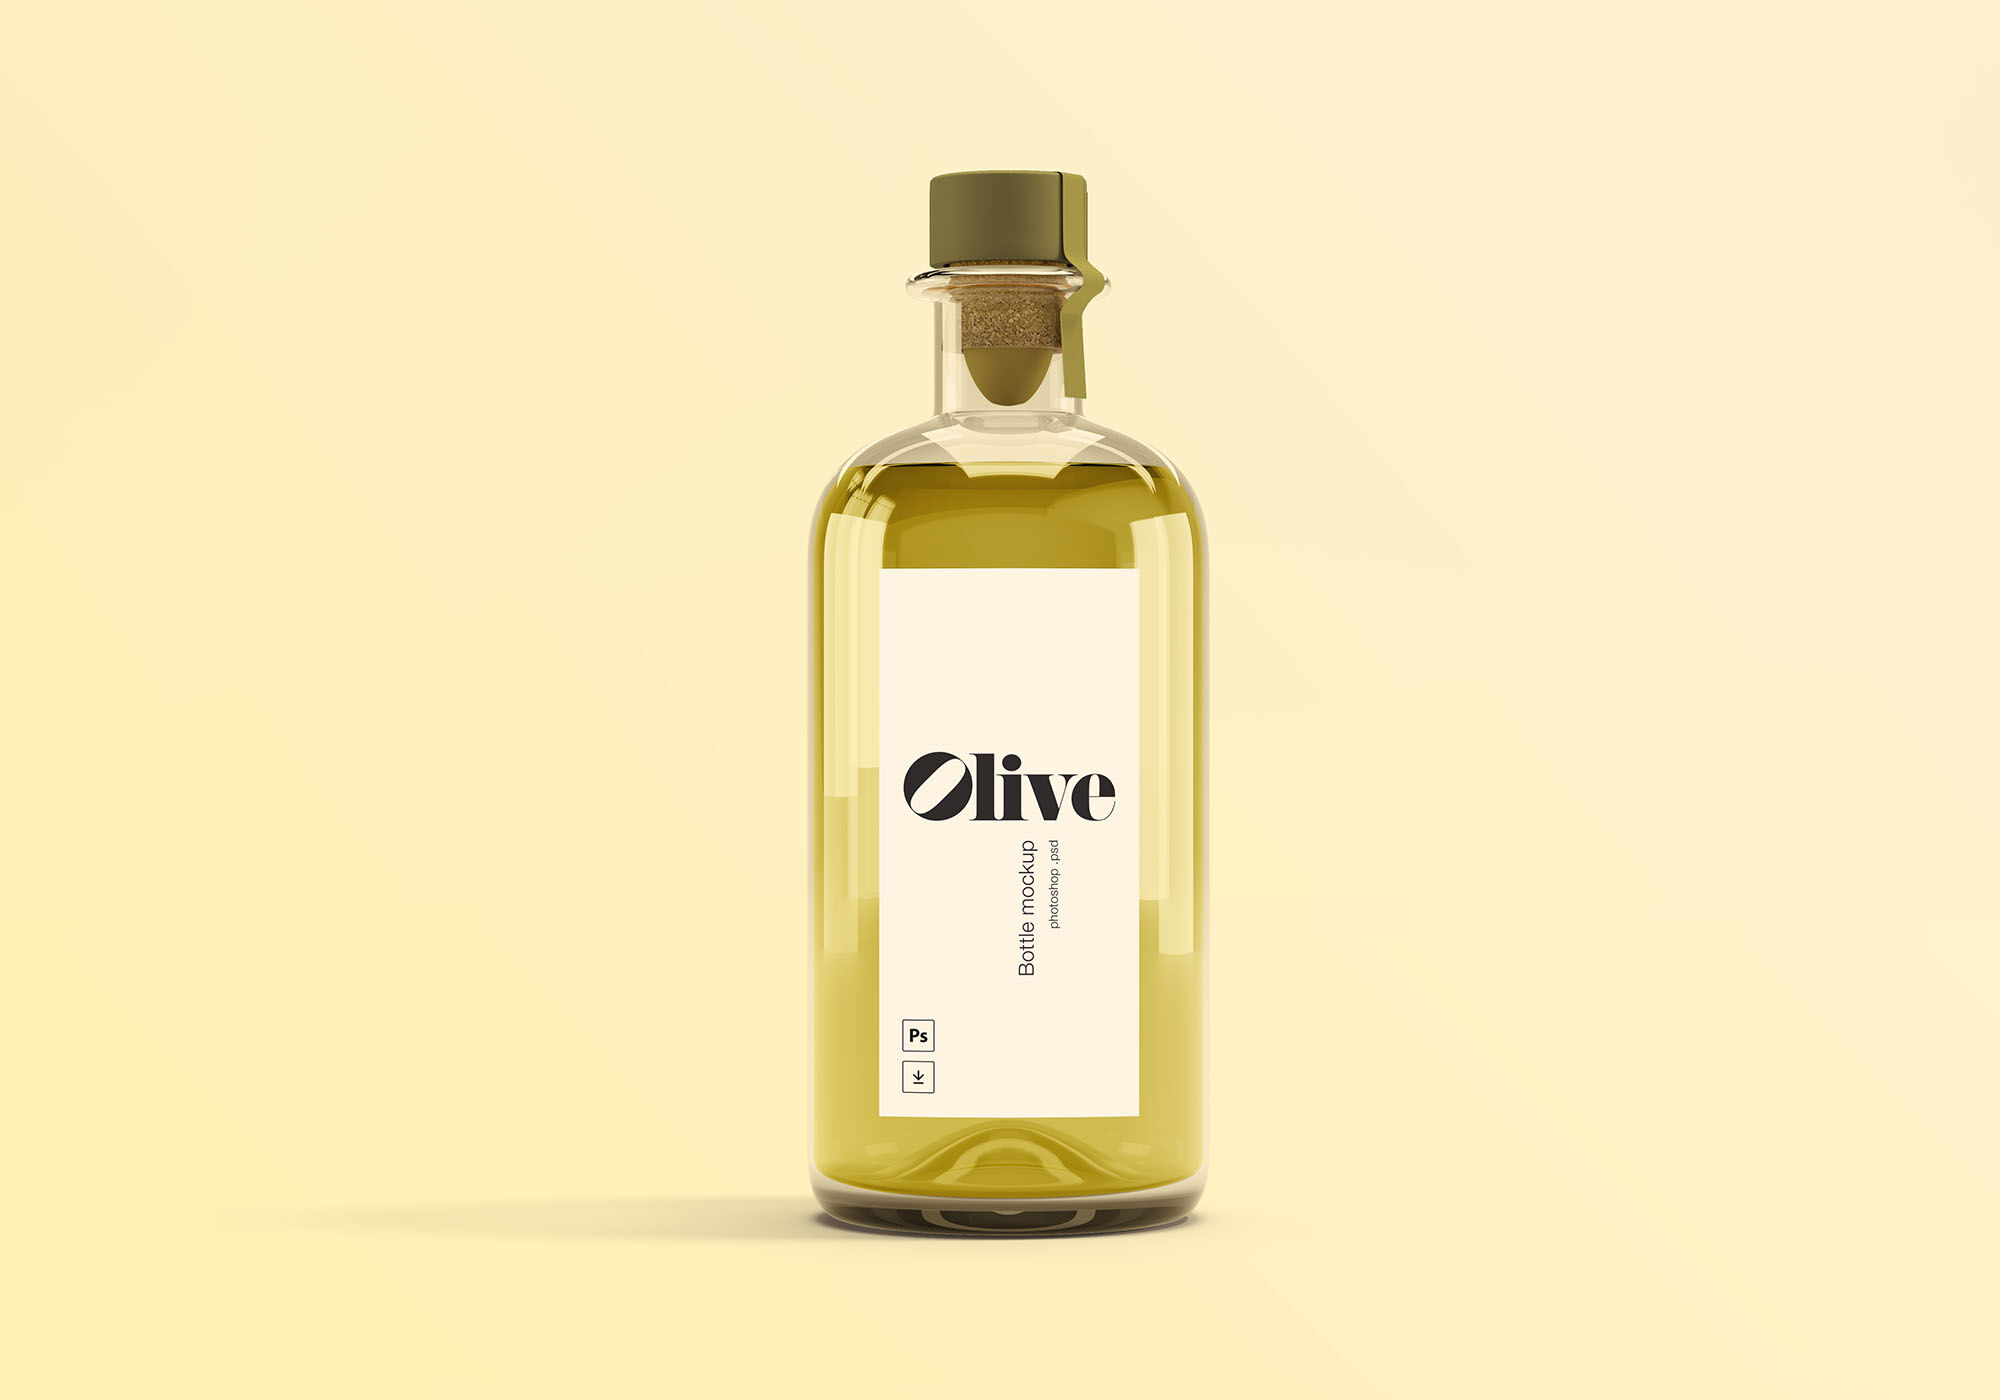 Front View of Olive Oil Bottle Wearing Cap Mockup FREE PSD